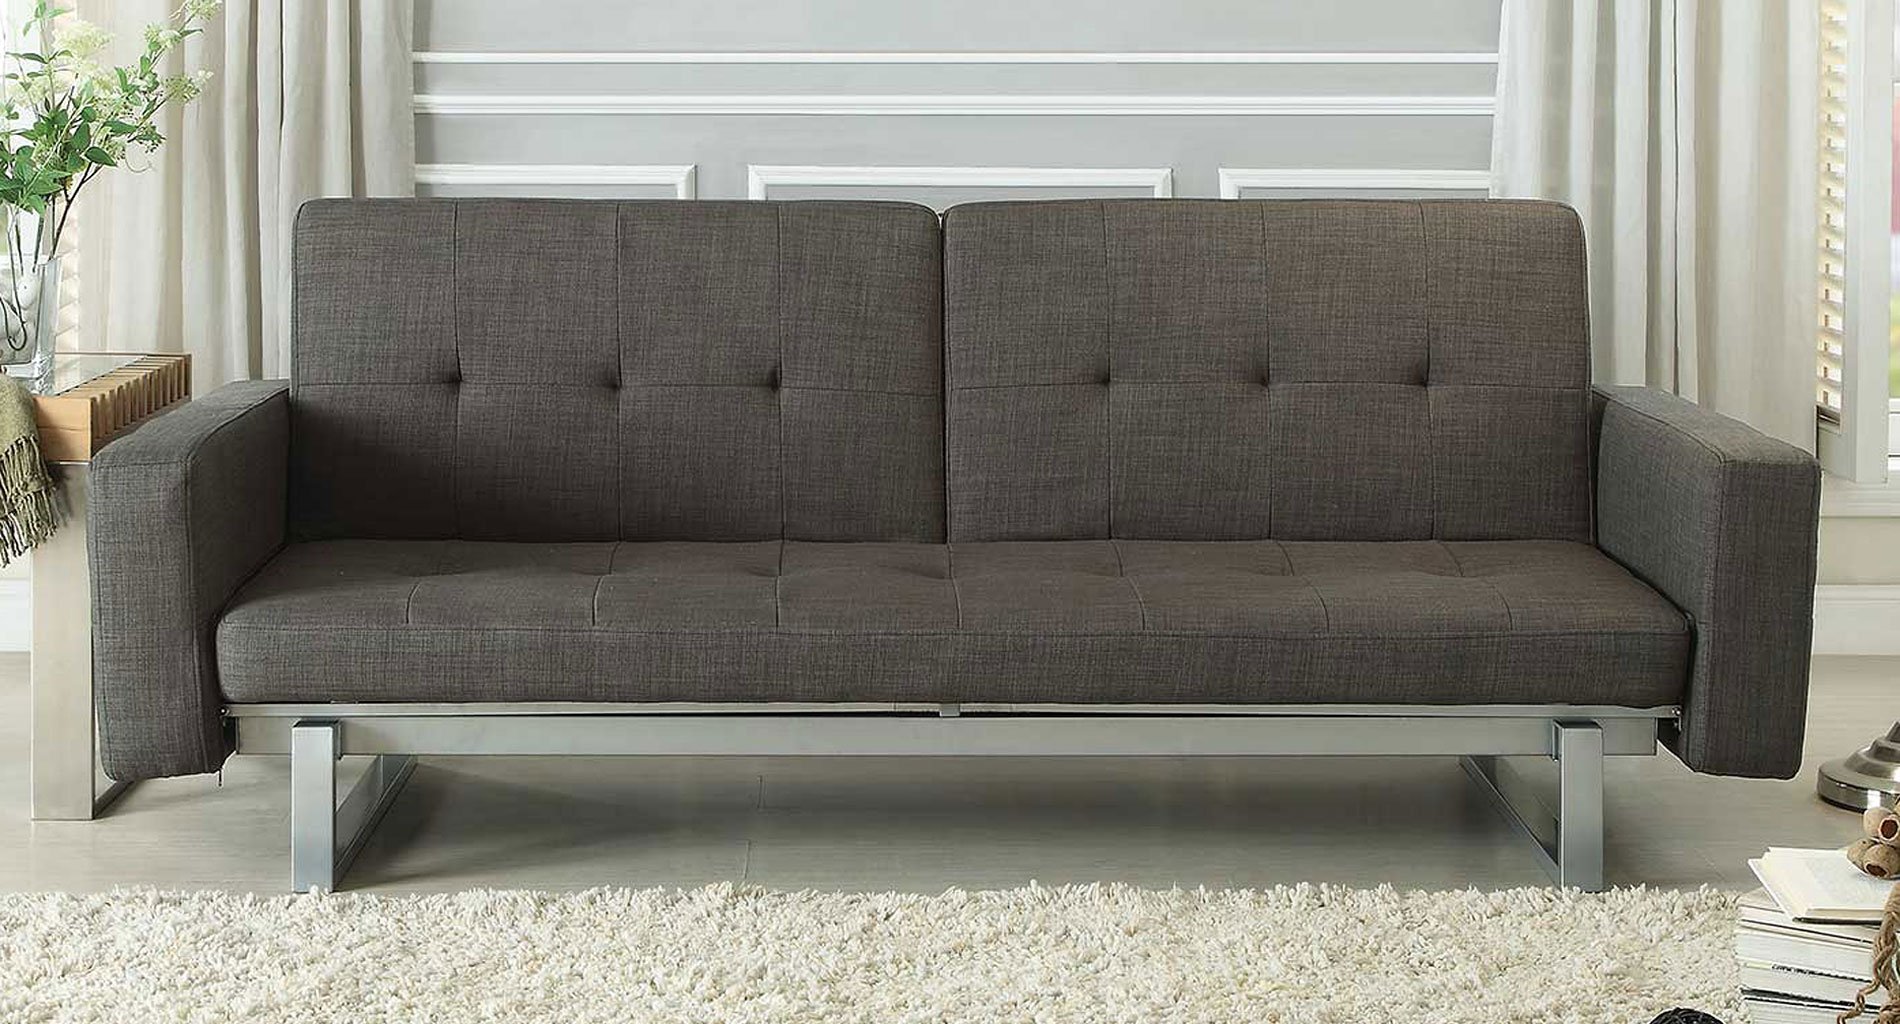 Crispin Sleeper Sofa by Homelegance, 1 Review(s